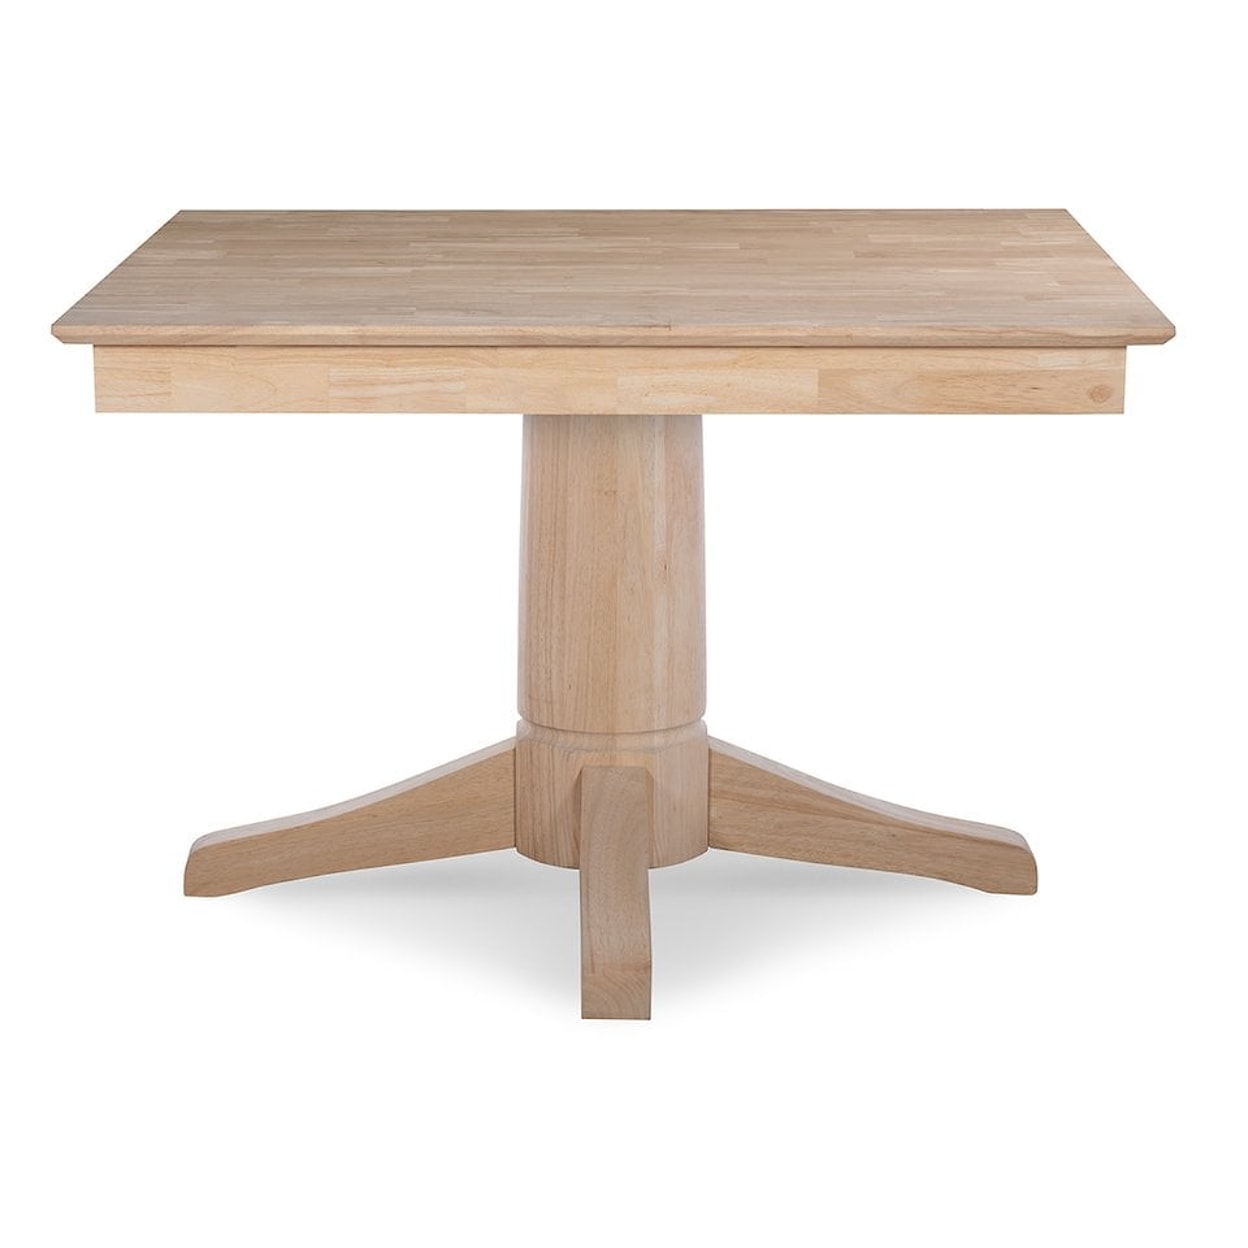 John Thomas SELECT Dining Room 42'' Square Solid Table